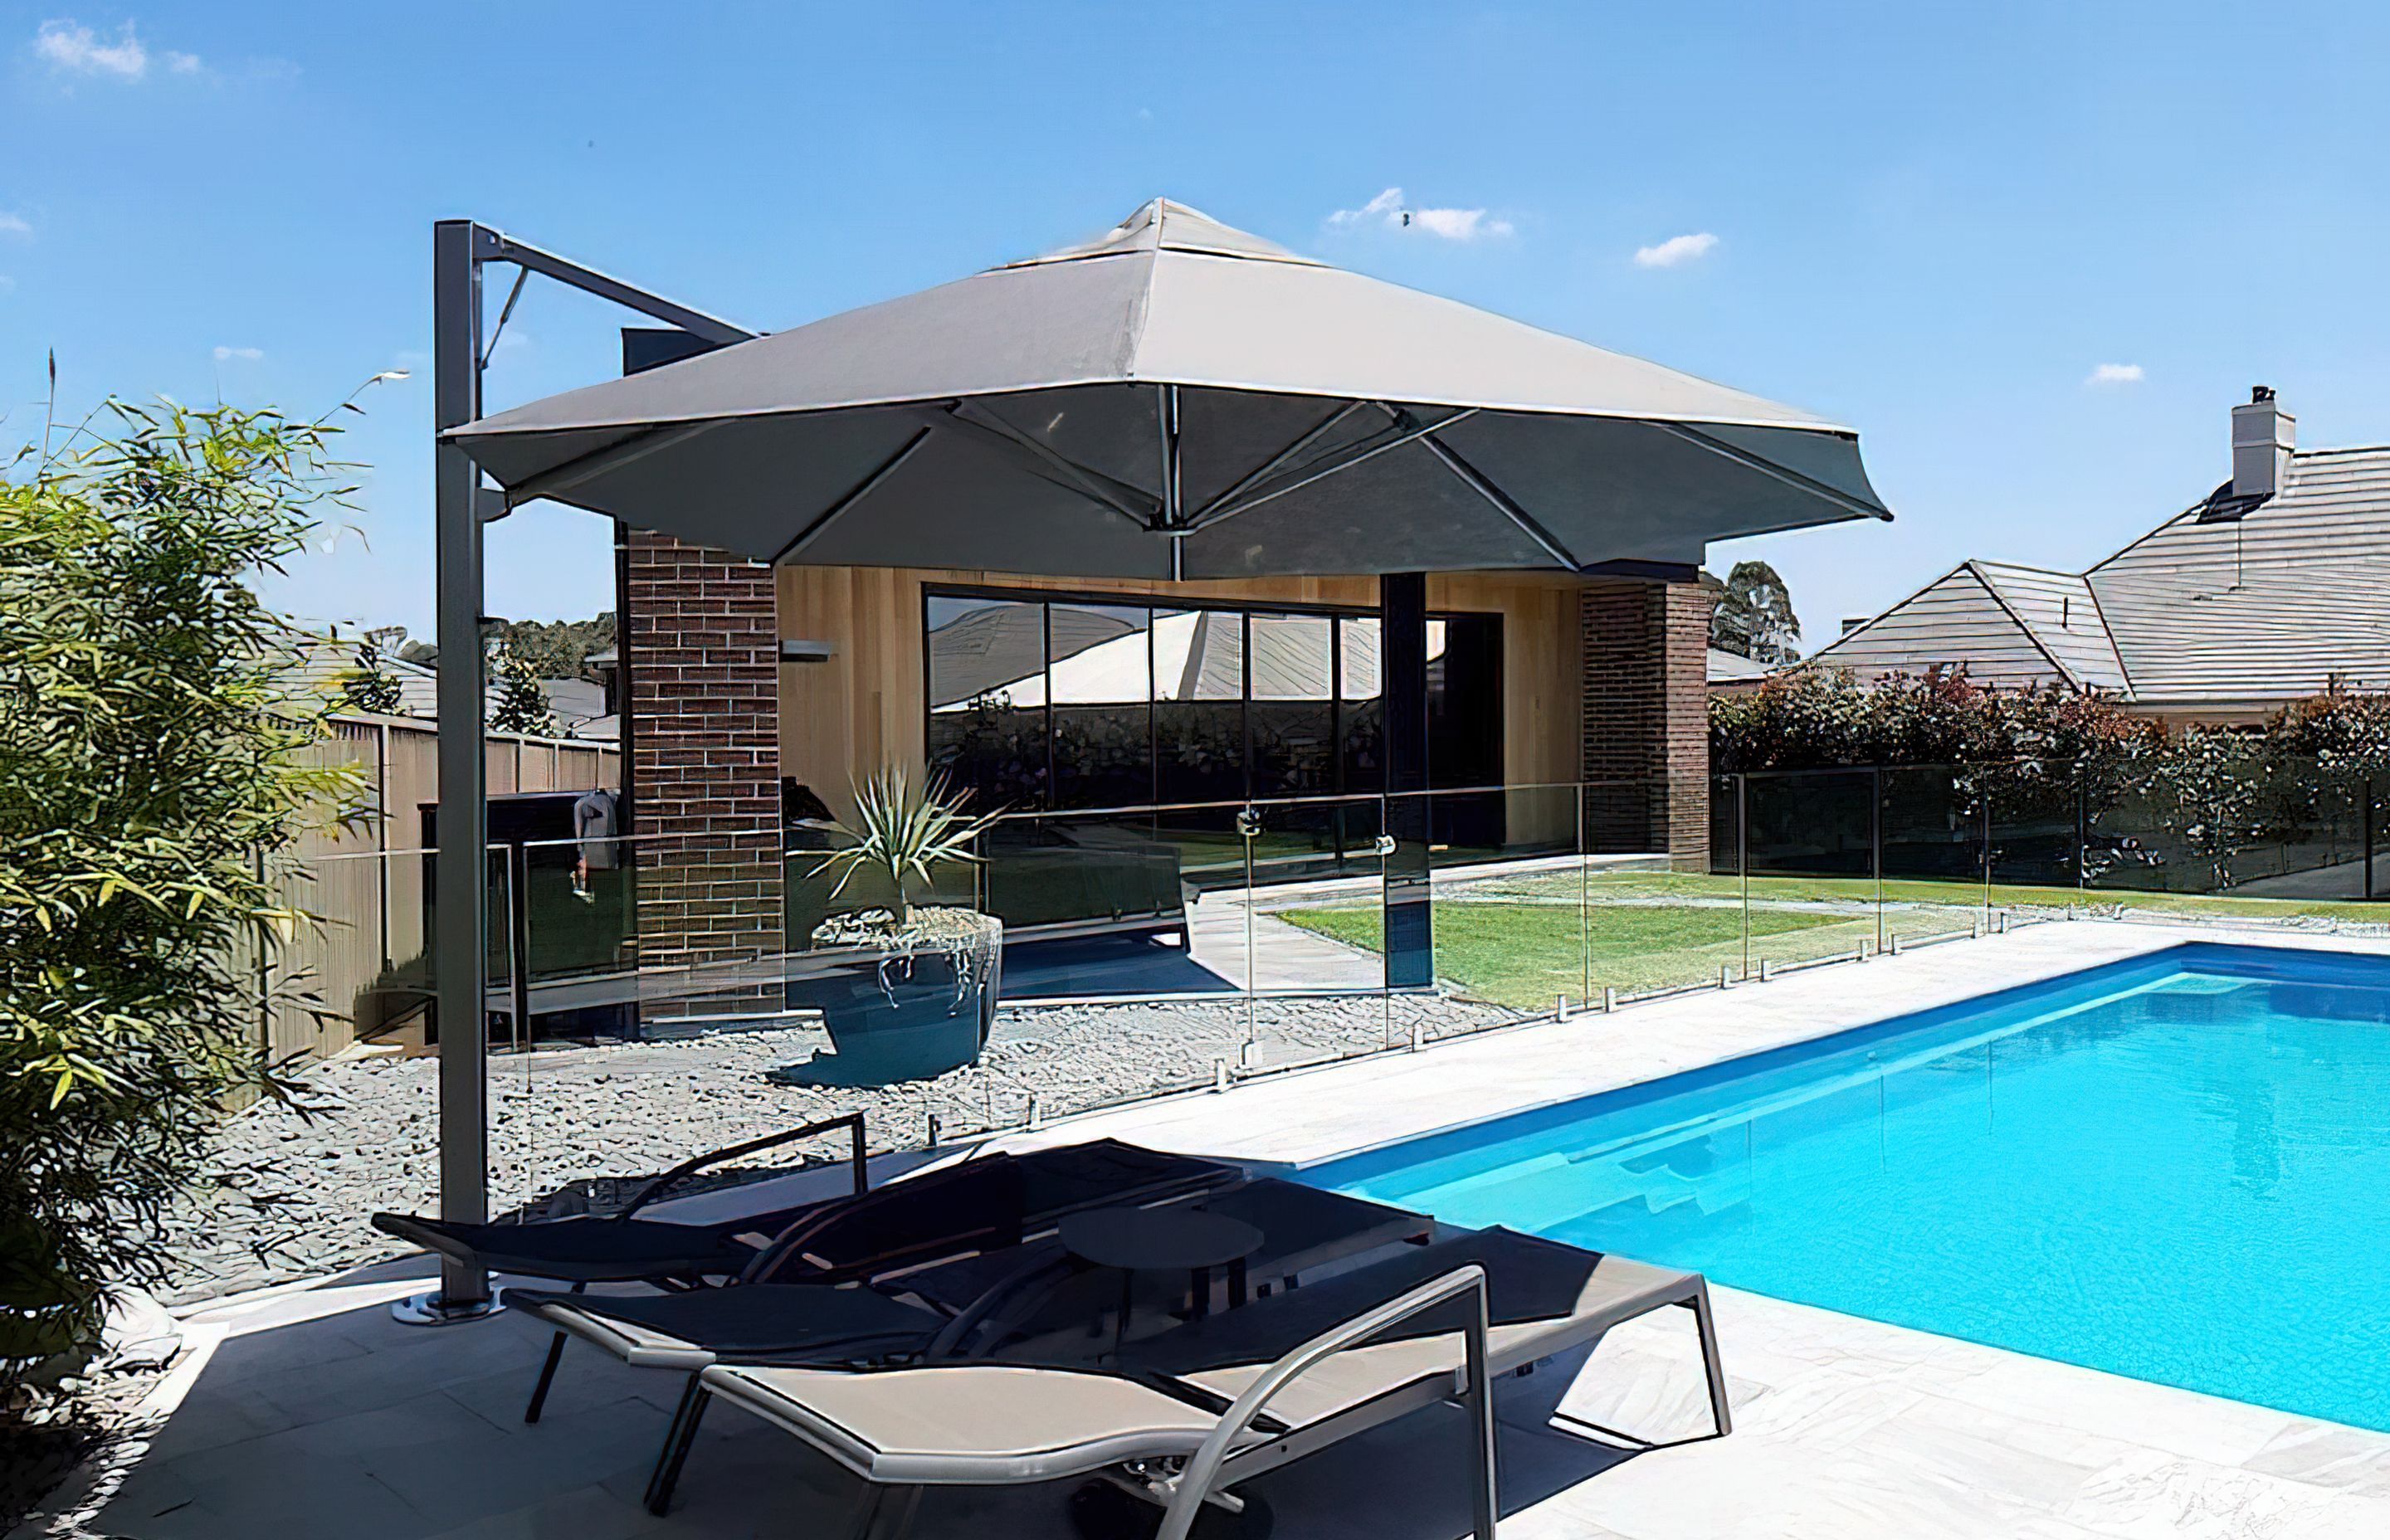 Does Your Outdoor Umbrella Protect You From The Sun?